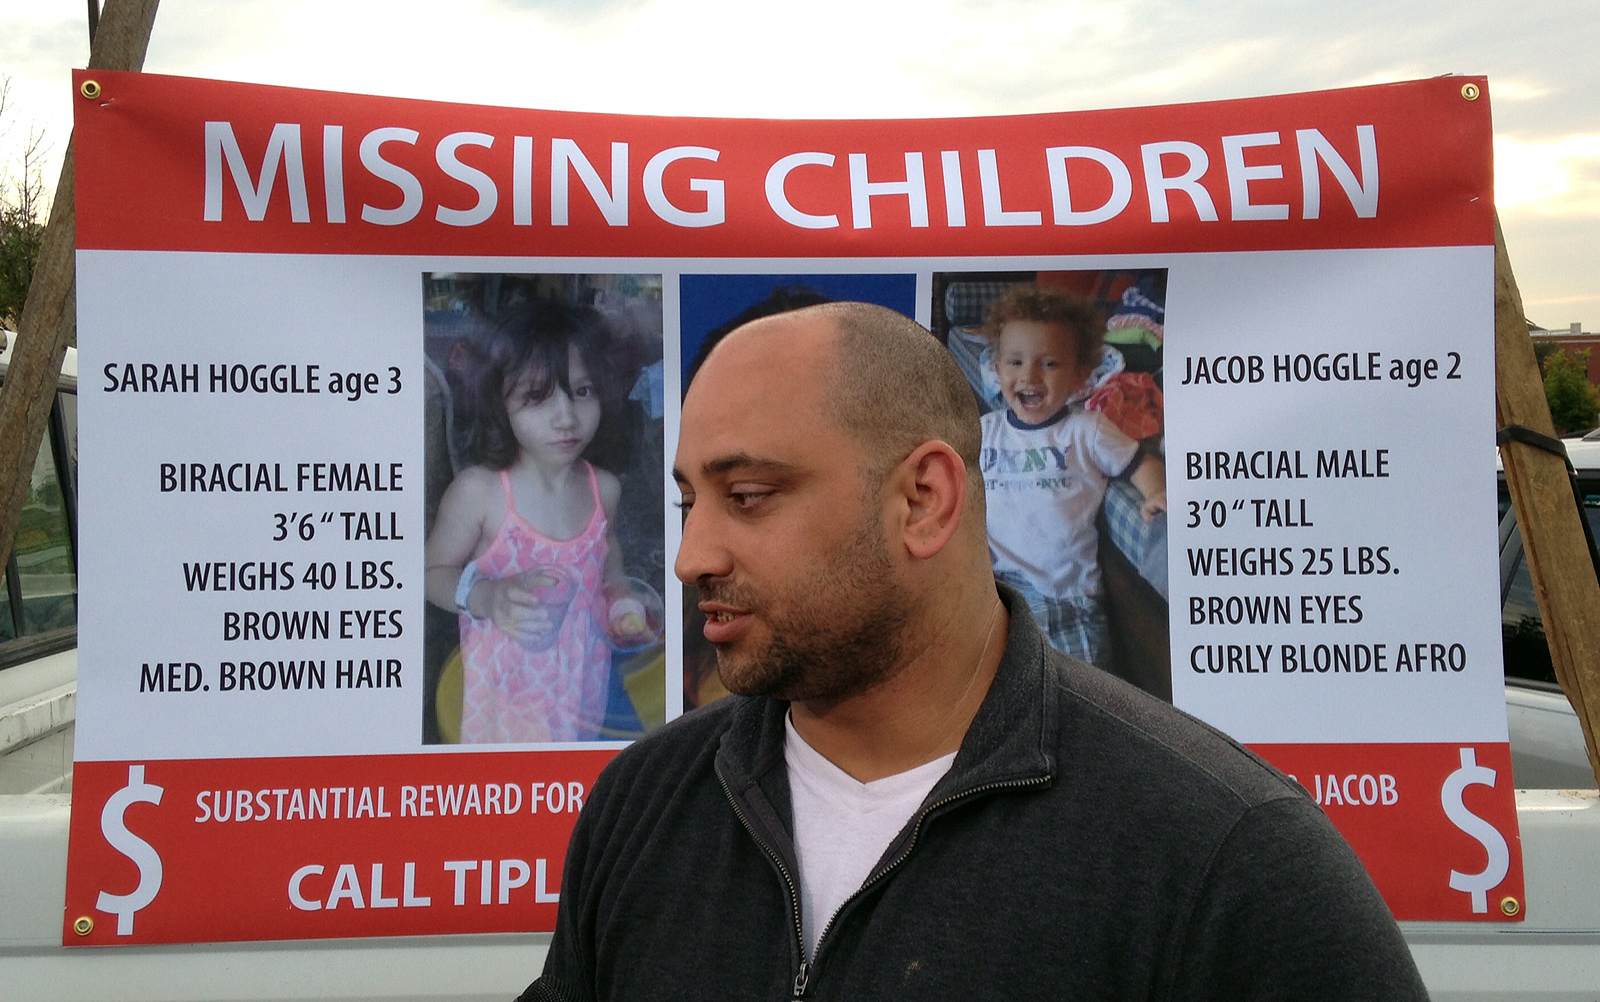 Father of missing Clarksburg children believes they are alive